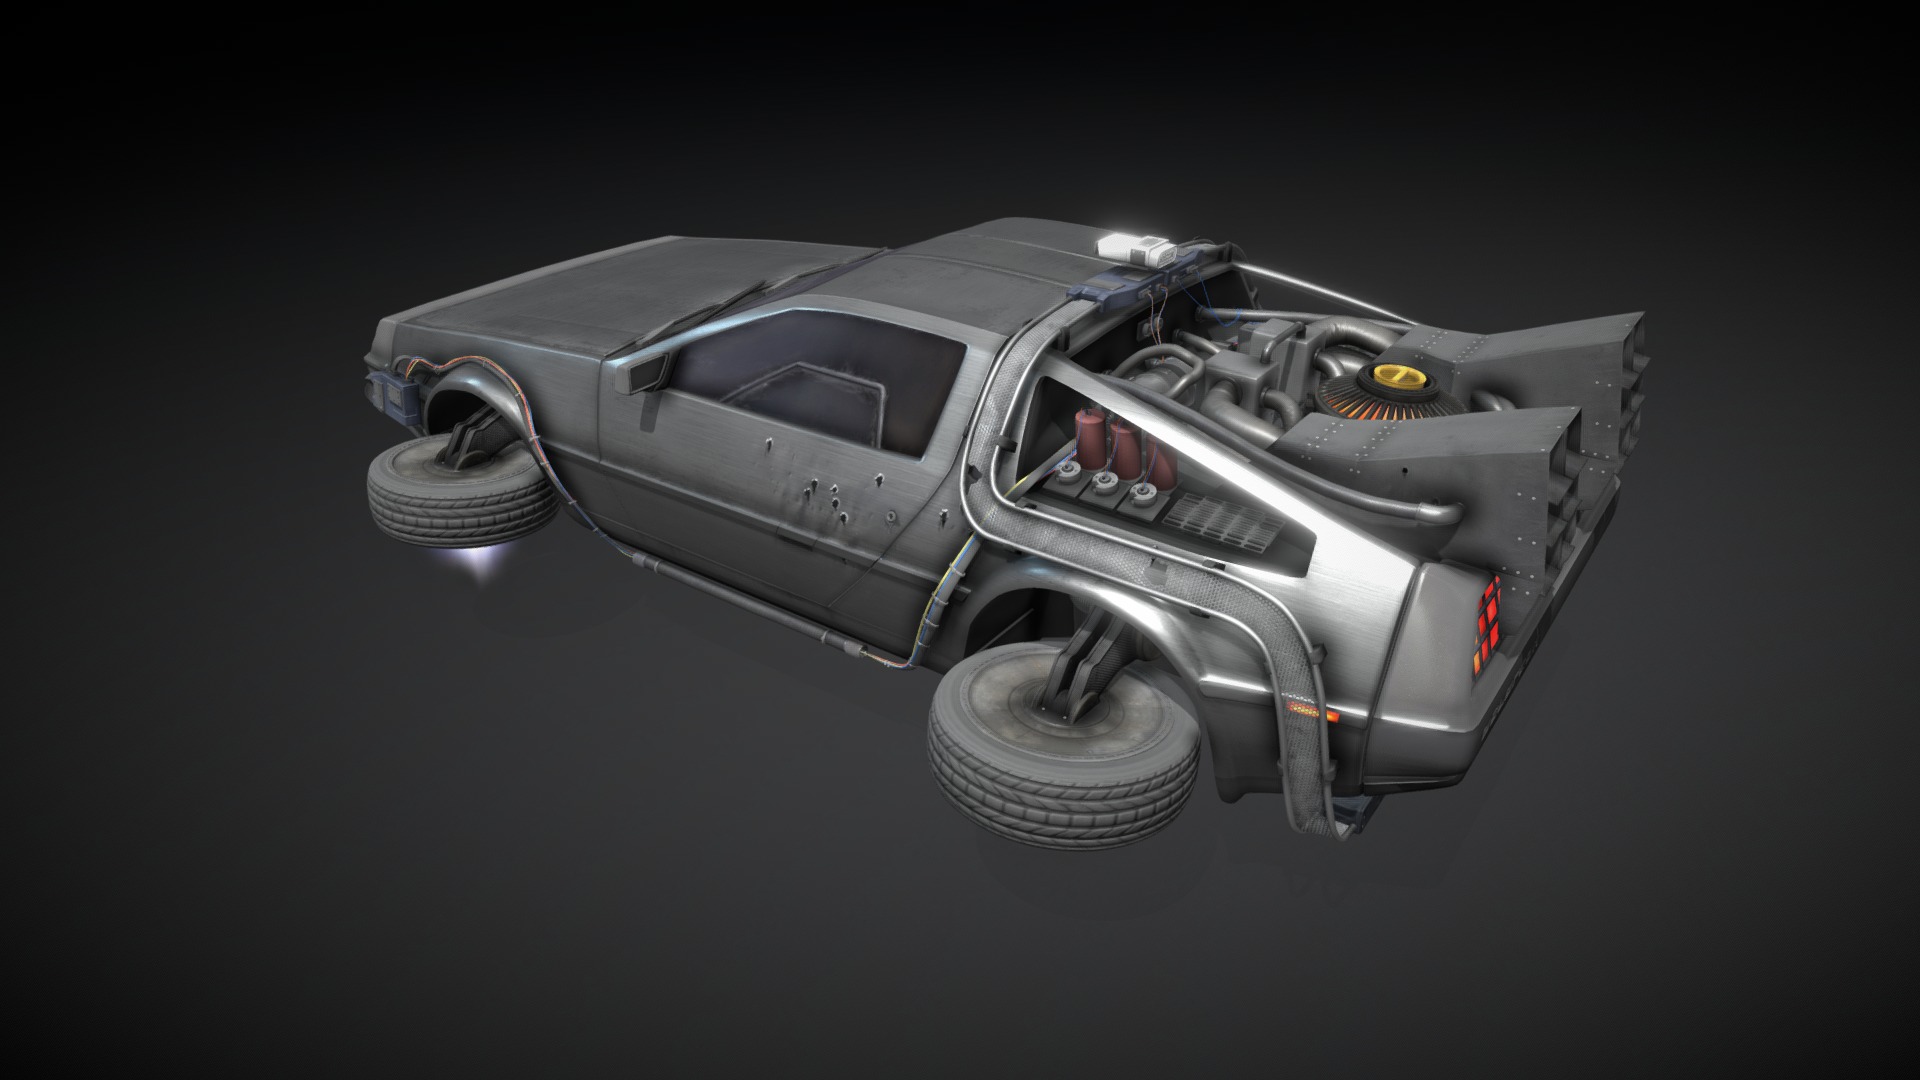 3D model Ready Player One – Parzival’s Delorean - This is a 3D model of the Ready Player One - Parzival's Delorean. The 3D model is about a toy car on a black background.